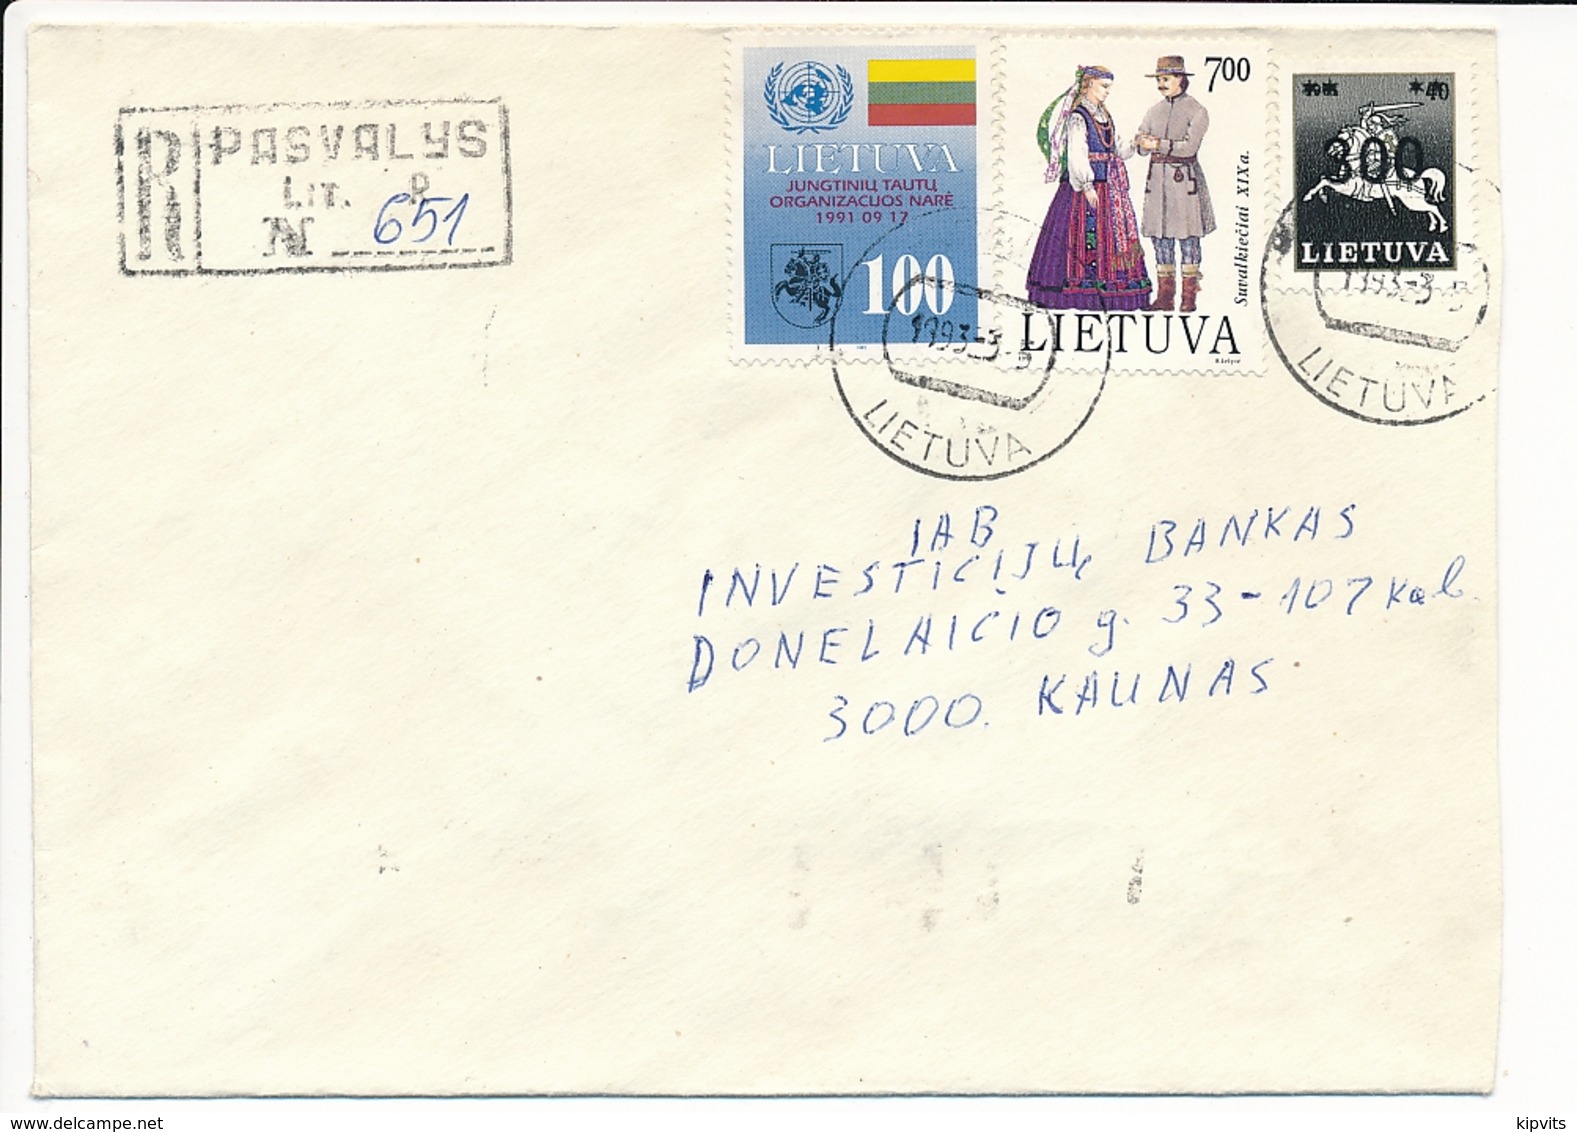 Registered Domestic Cover / Overprint Vytis - 5 March 1993 Pasvalys - Lithuania